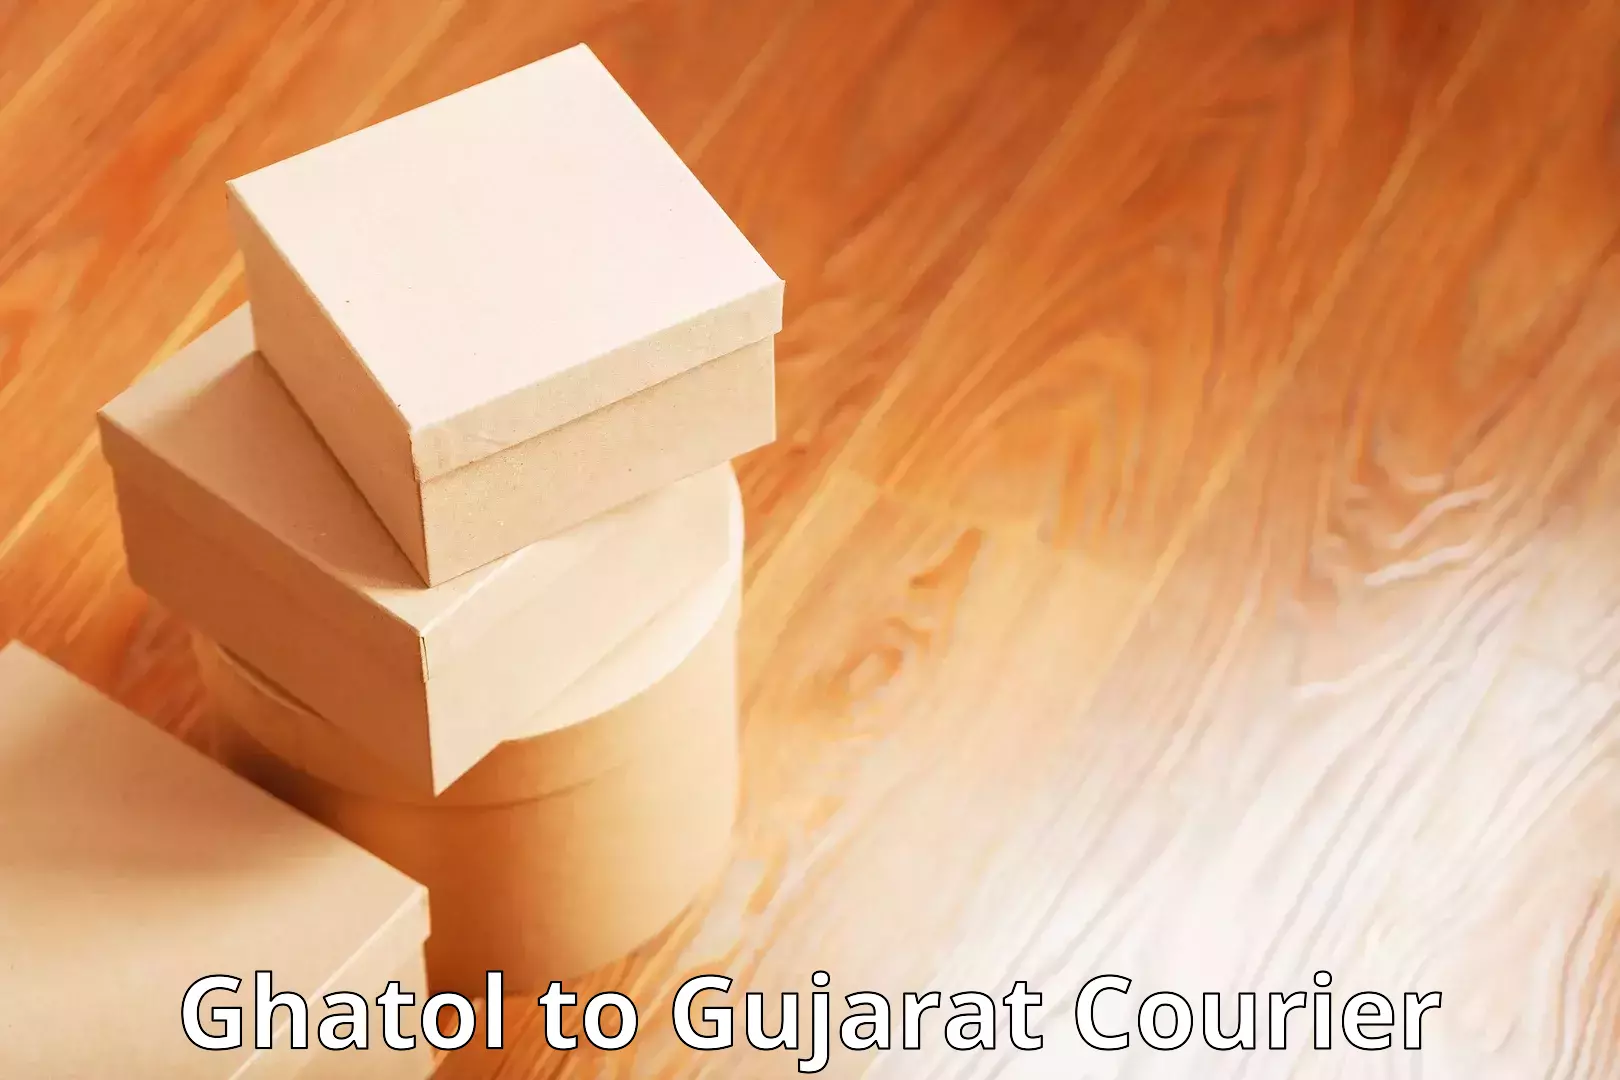 Express courier capabilities Ghatol to Gujarat